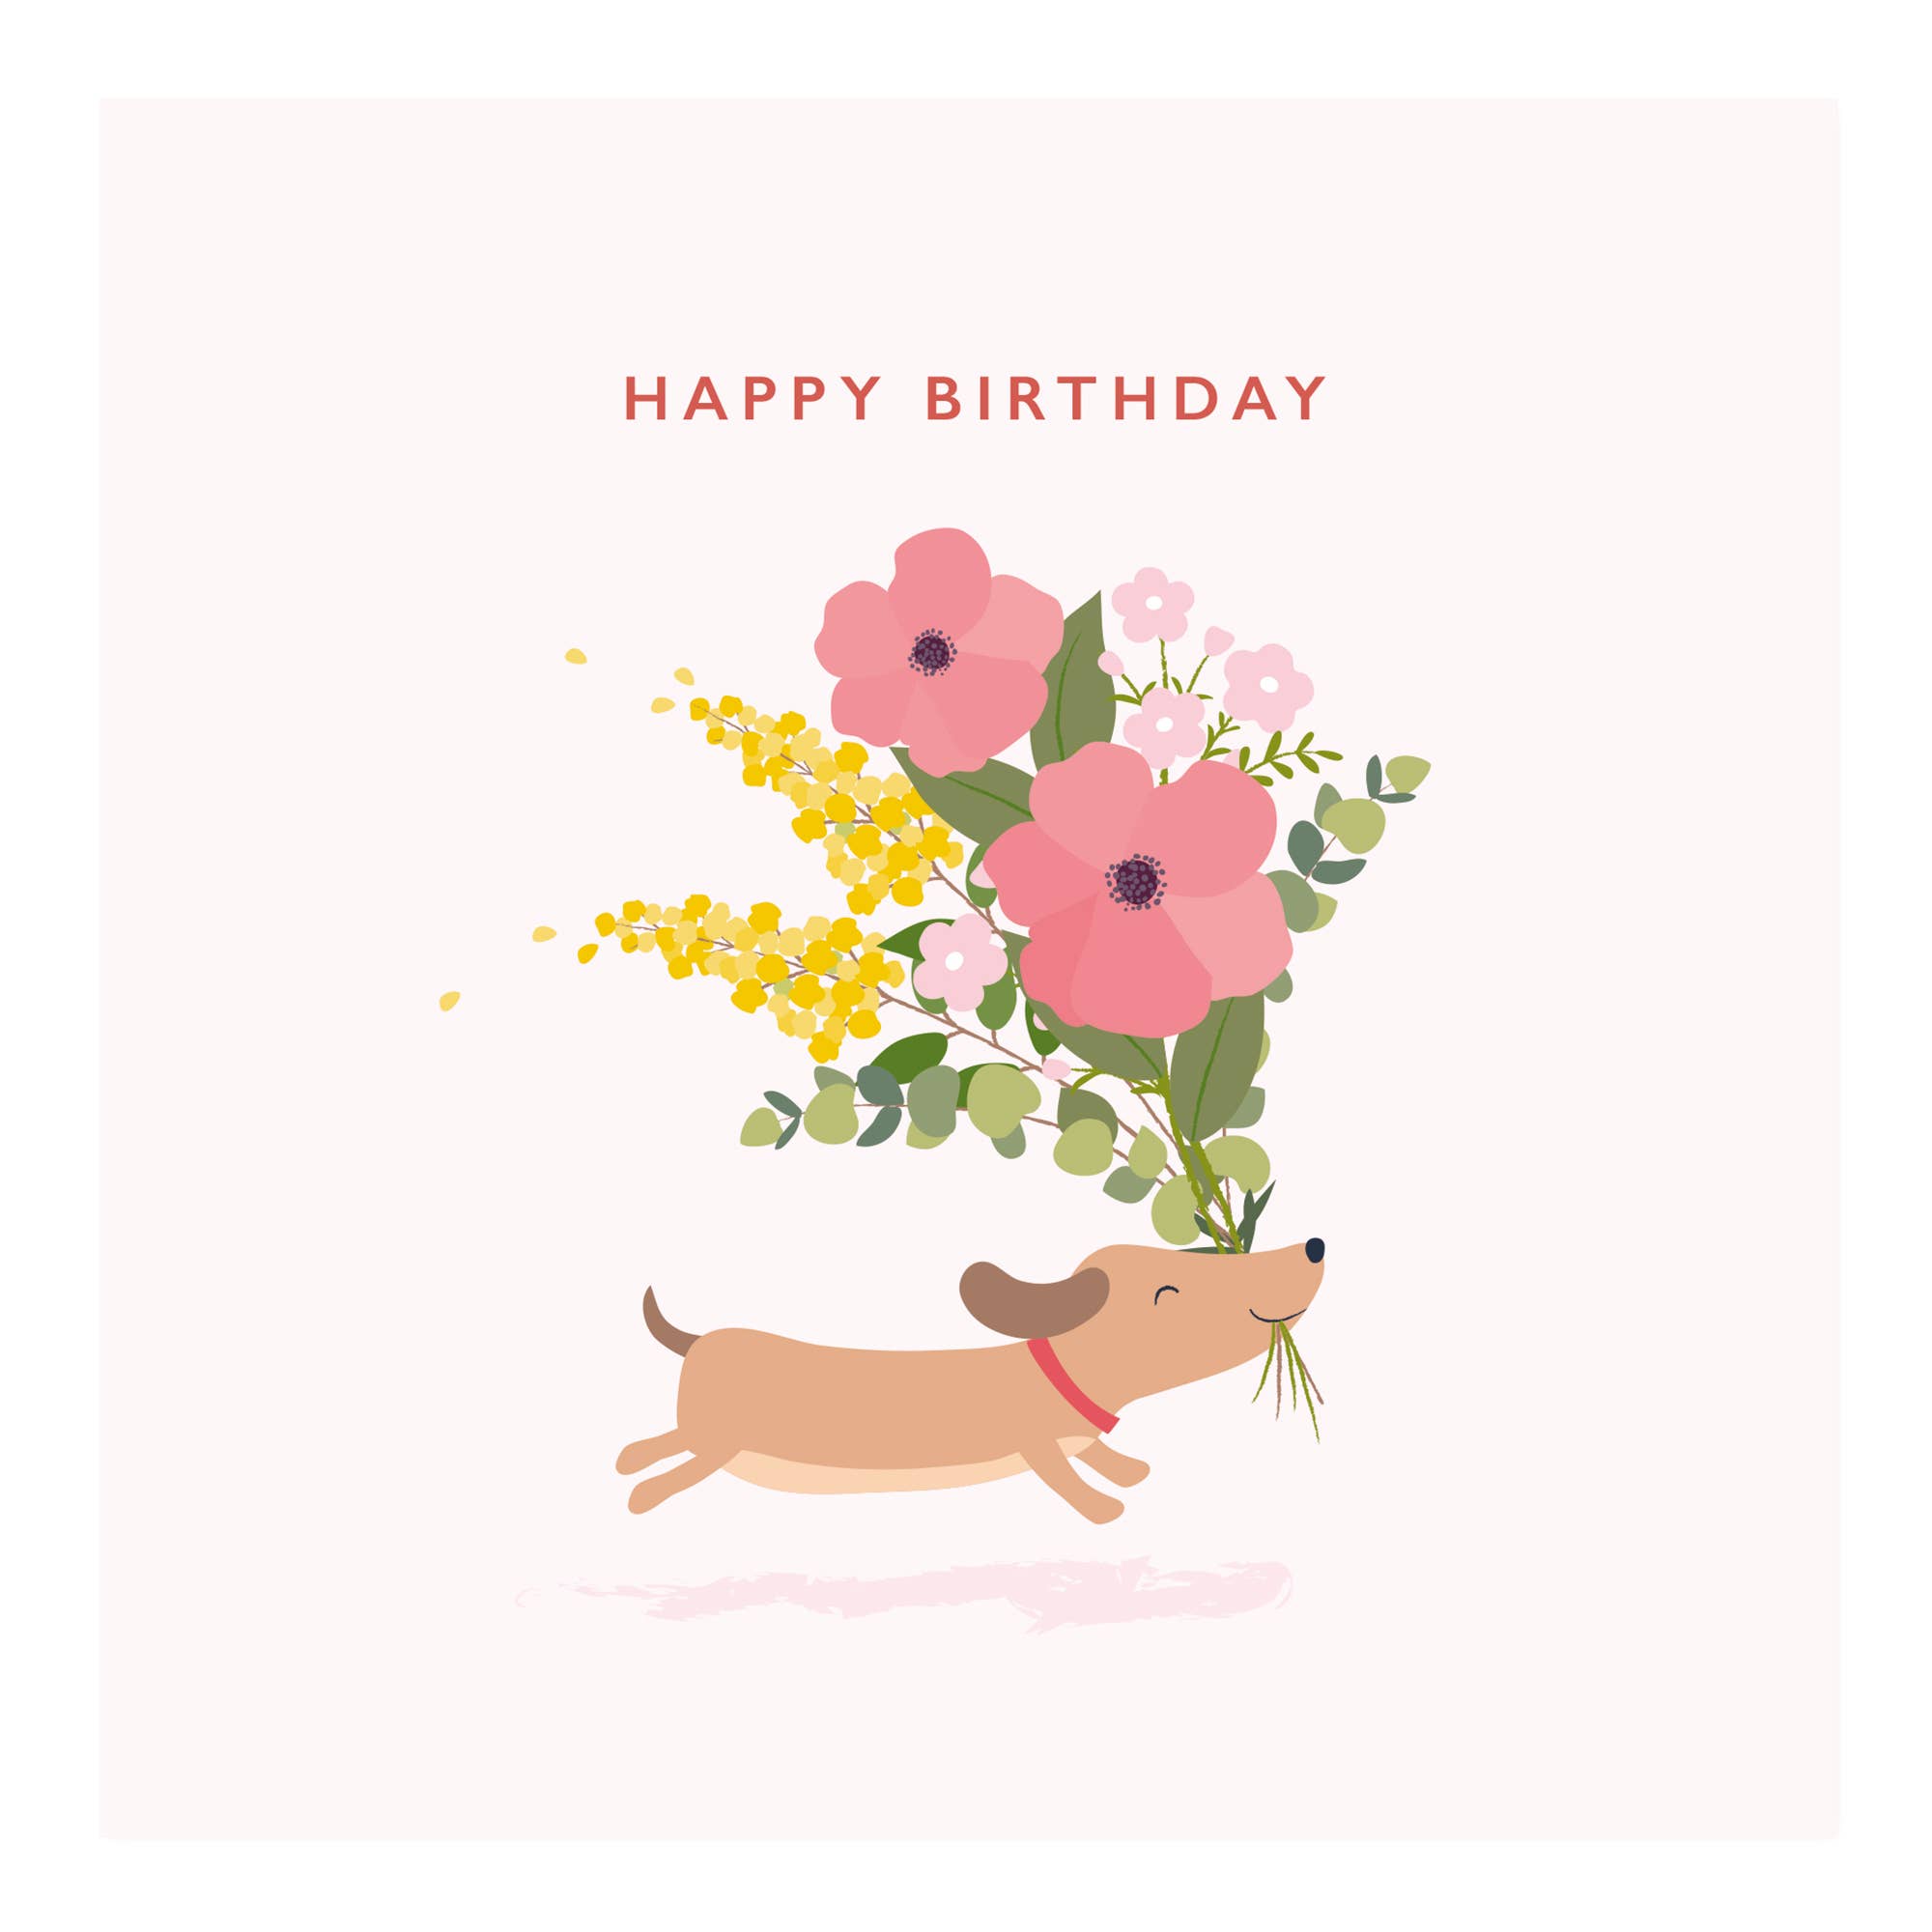 Happy Birthday Card - Little Dog Running With Flowers PIP001